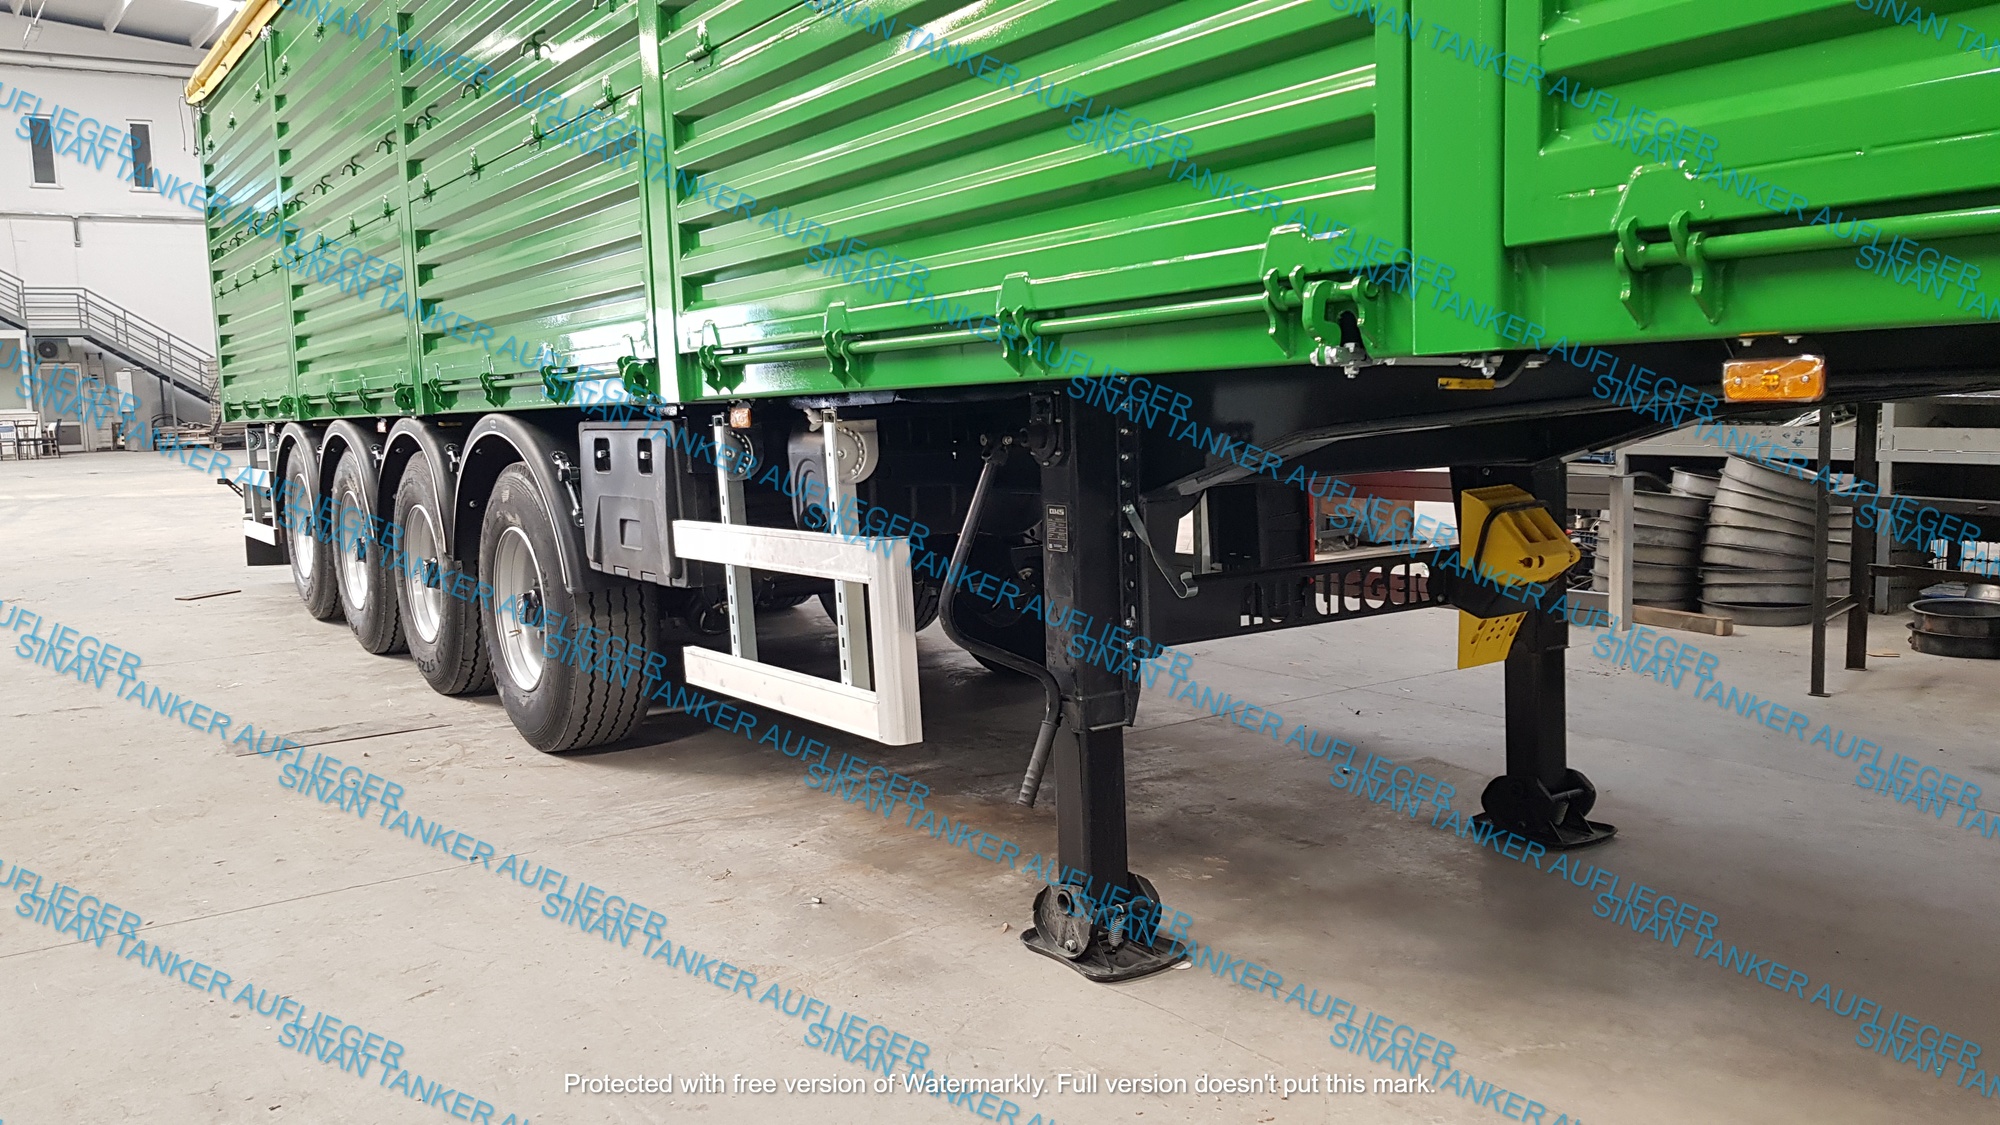 SİNANLI TANKER - TRAILER undefined: photos 5